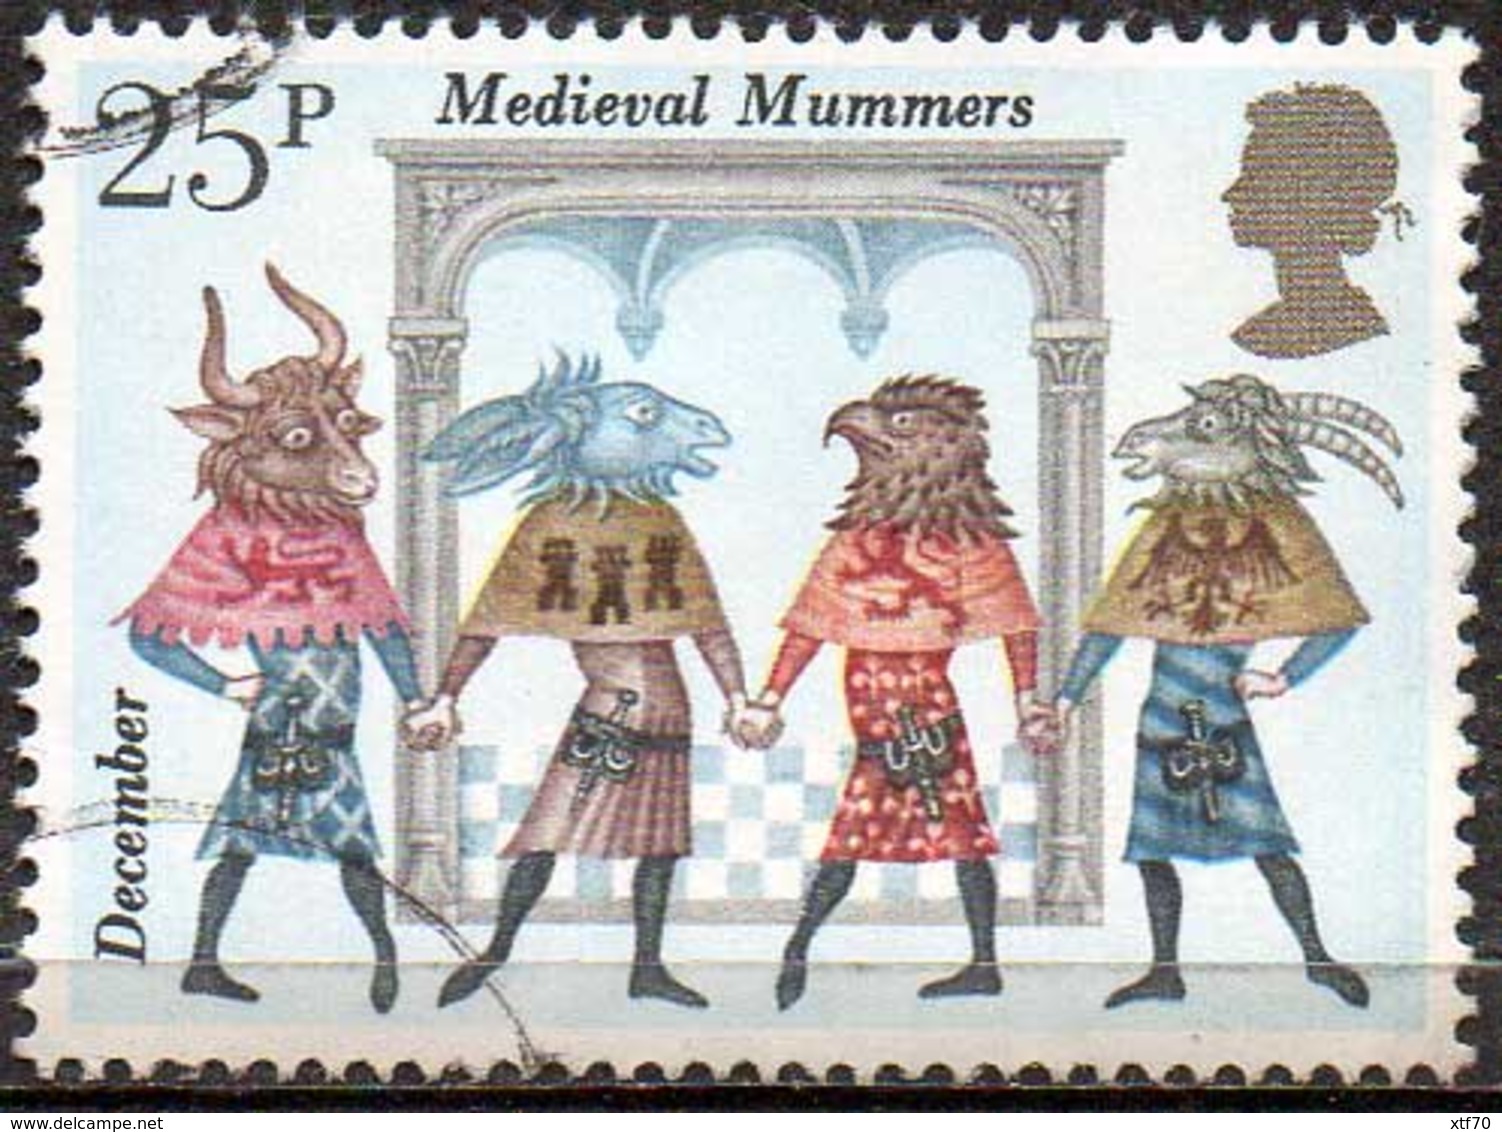 GREAT BRITAIN 1981 Folklore: 25p Medieval Mummers - Used Stamps